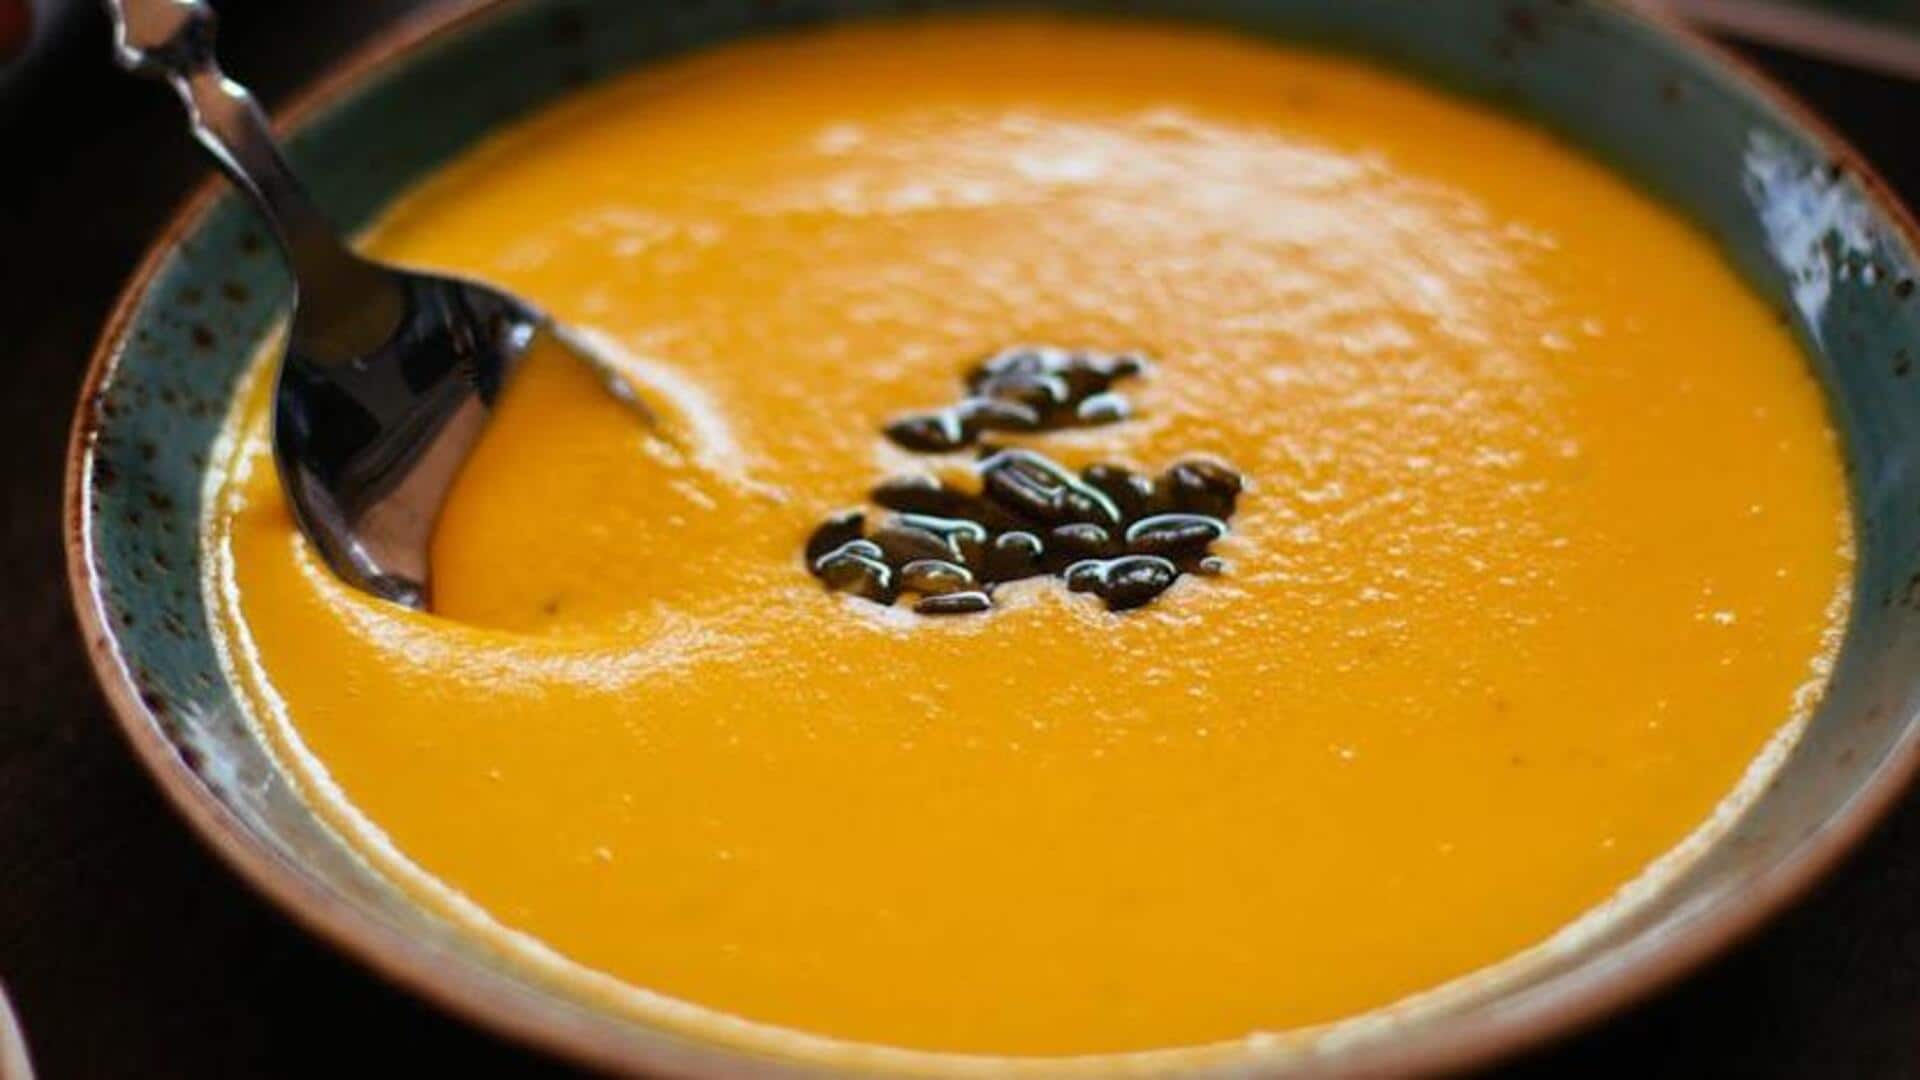 Savor the flavor of these lip-smacking squash soups